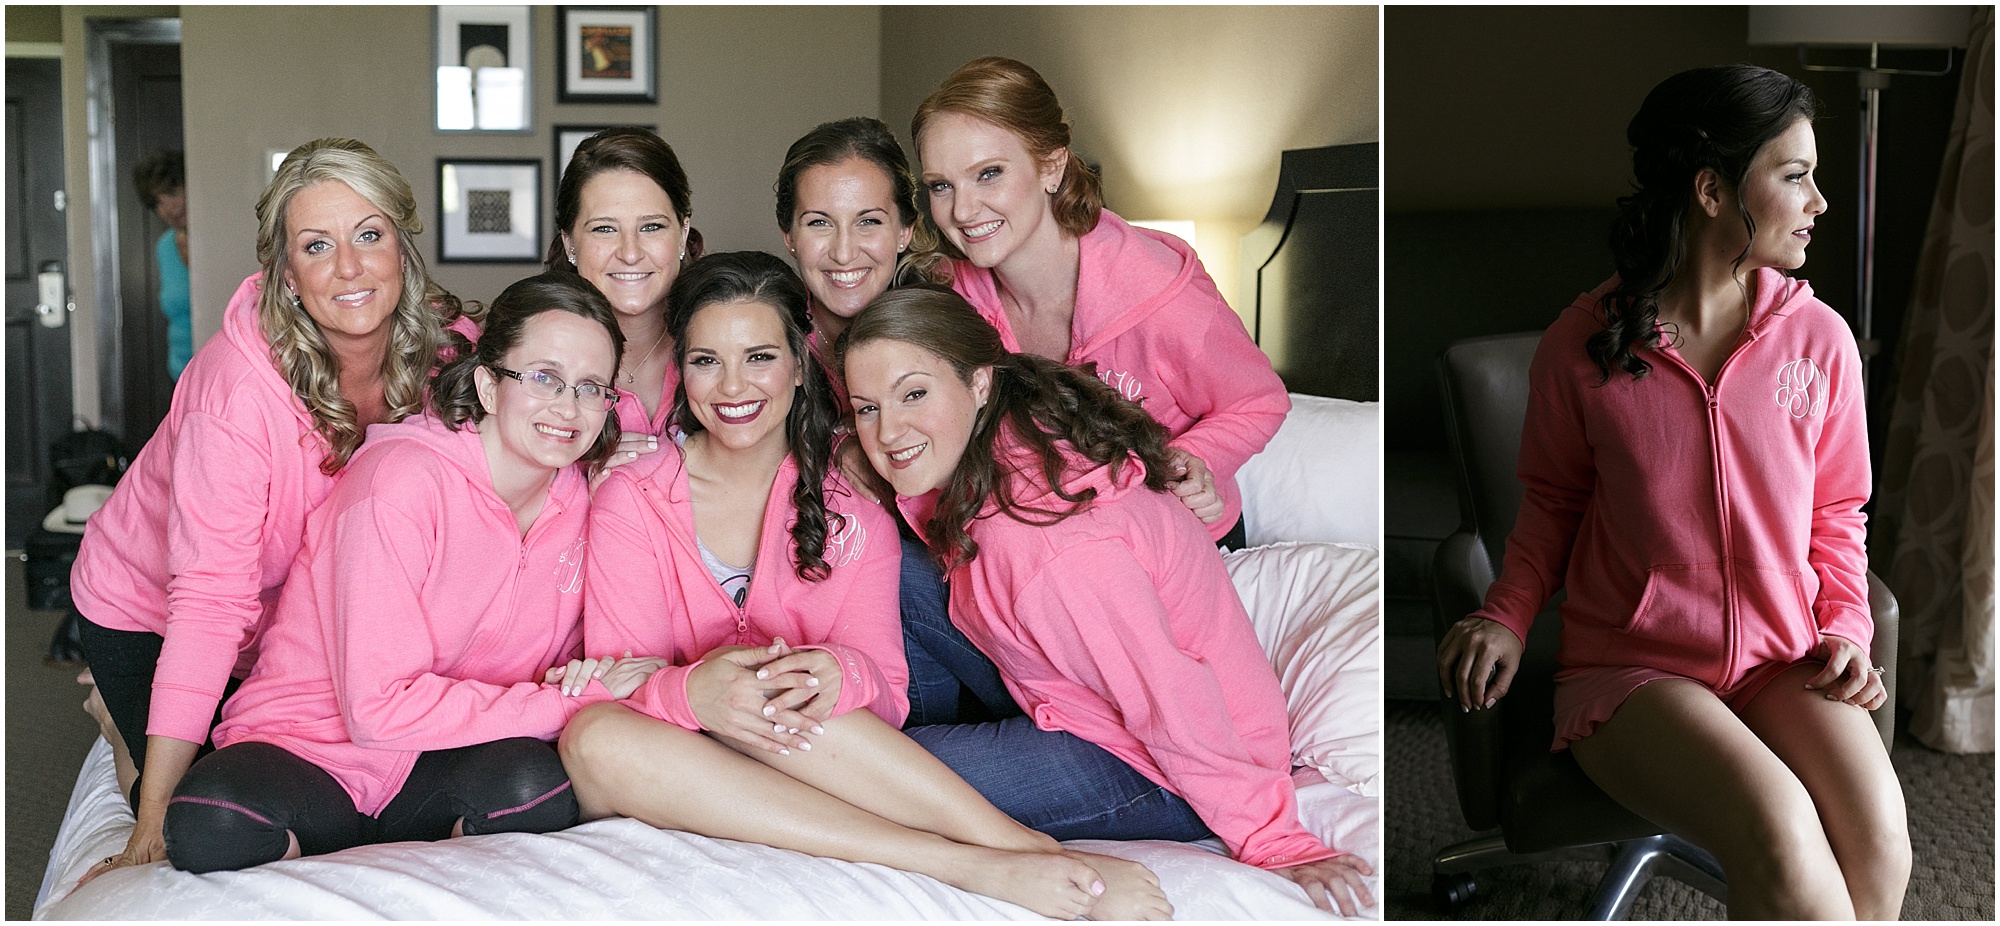 Bride and her bridesmaids relaxing before getting ready for the wedding. 